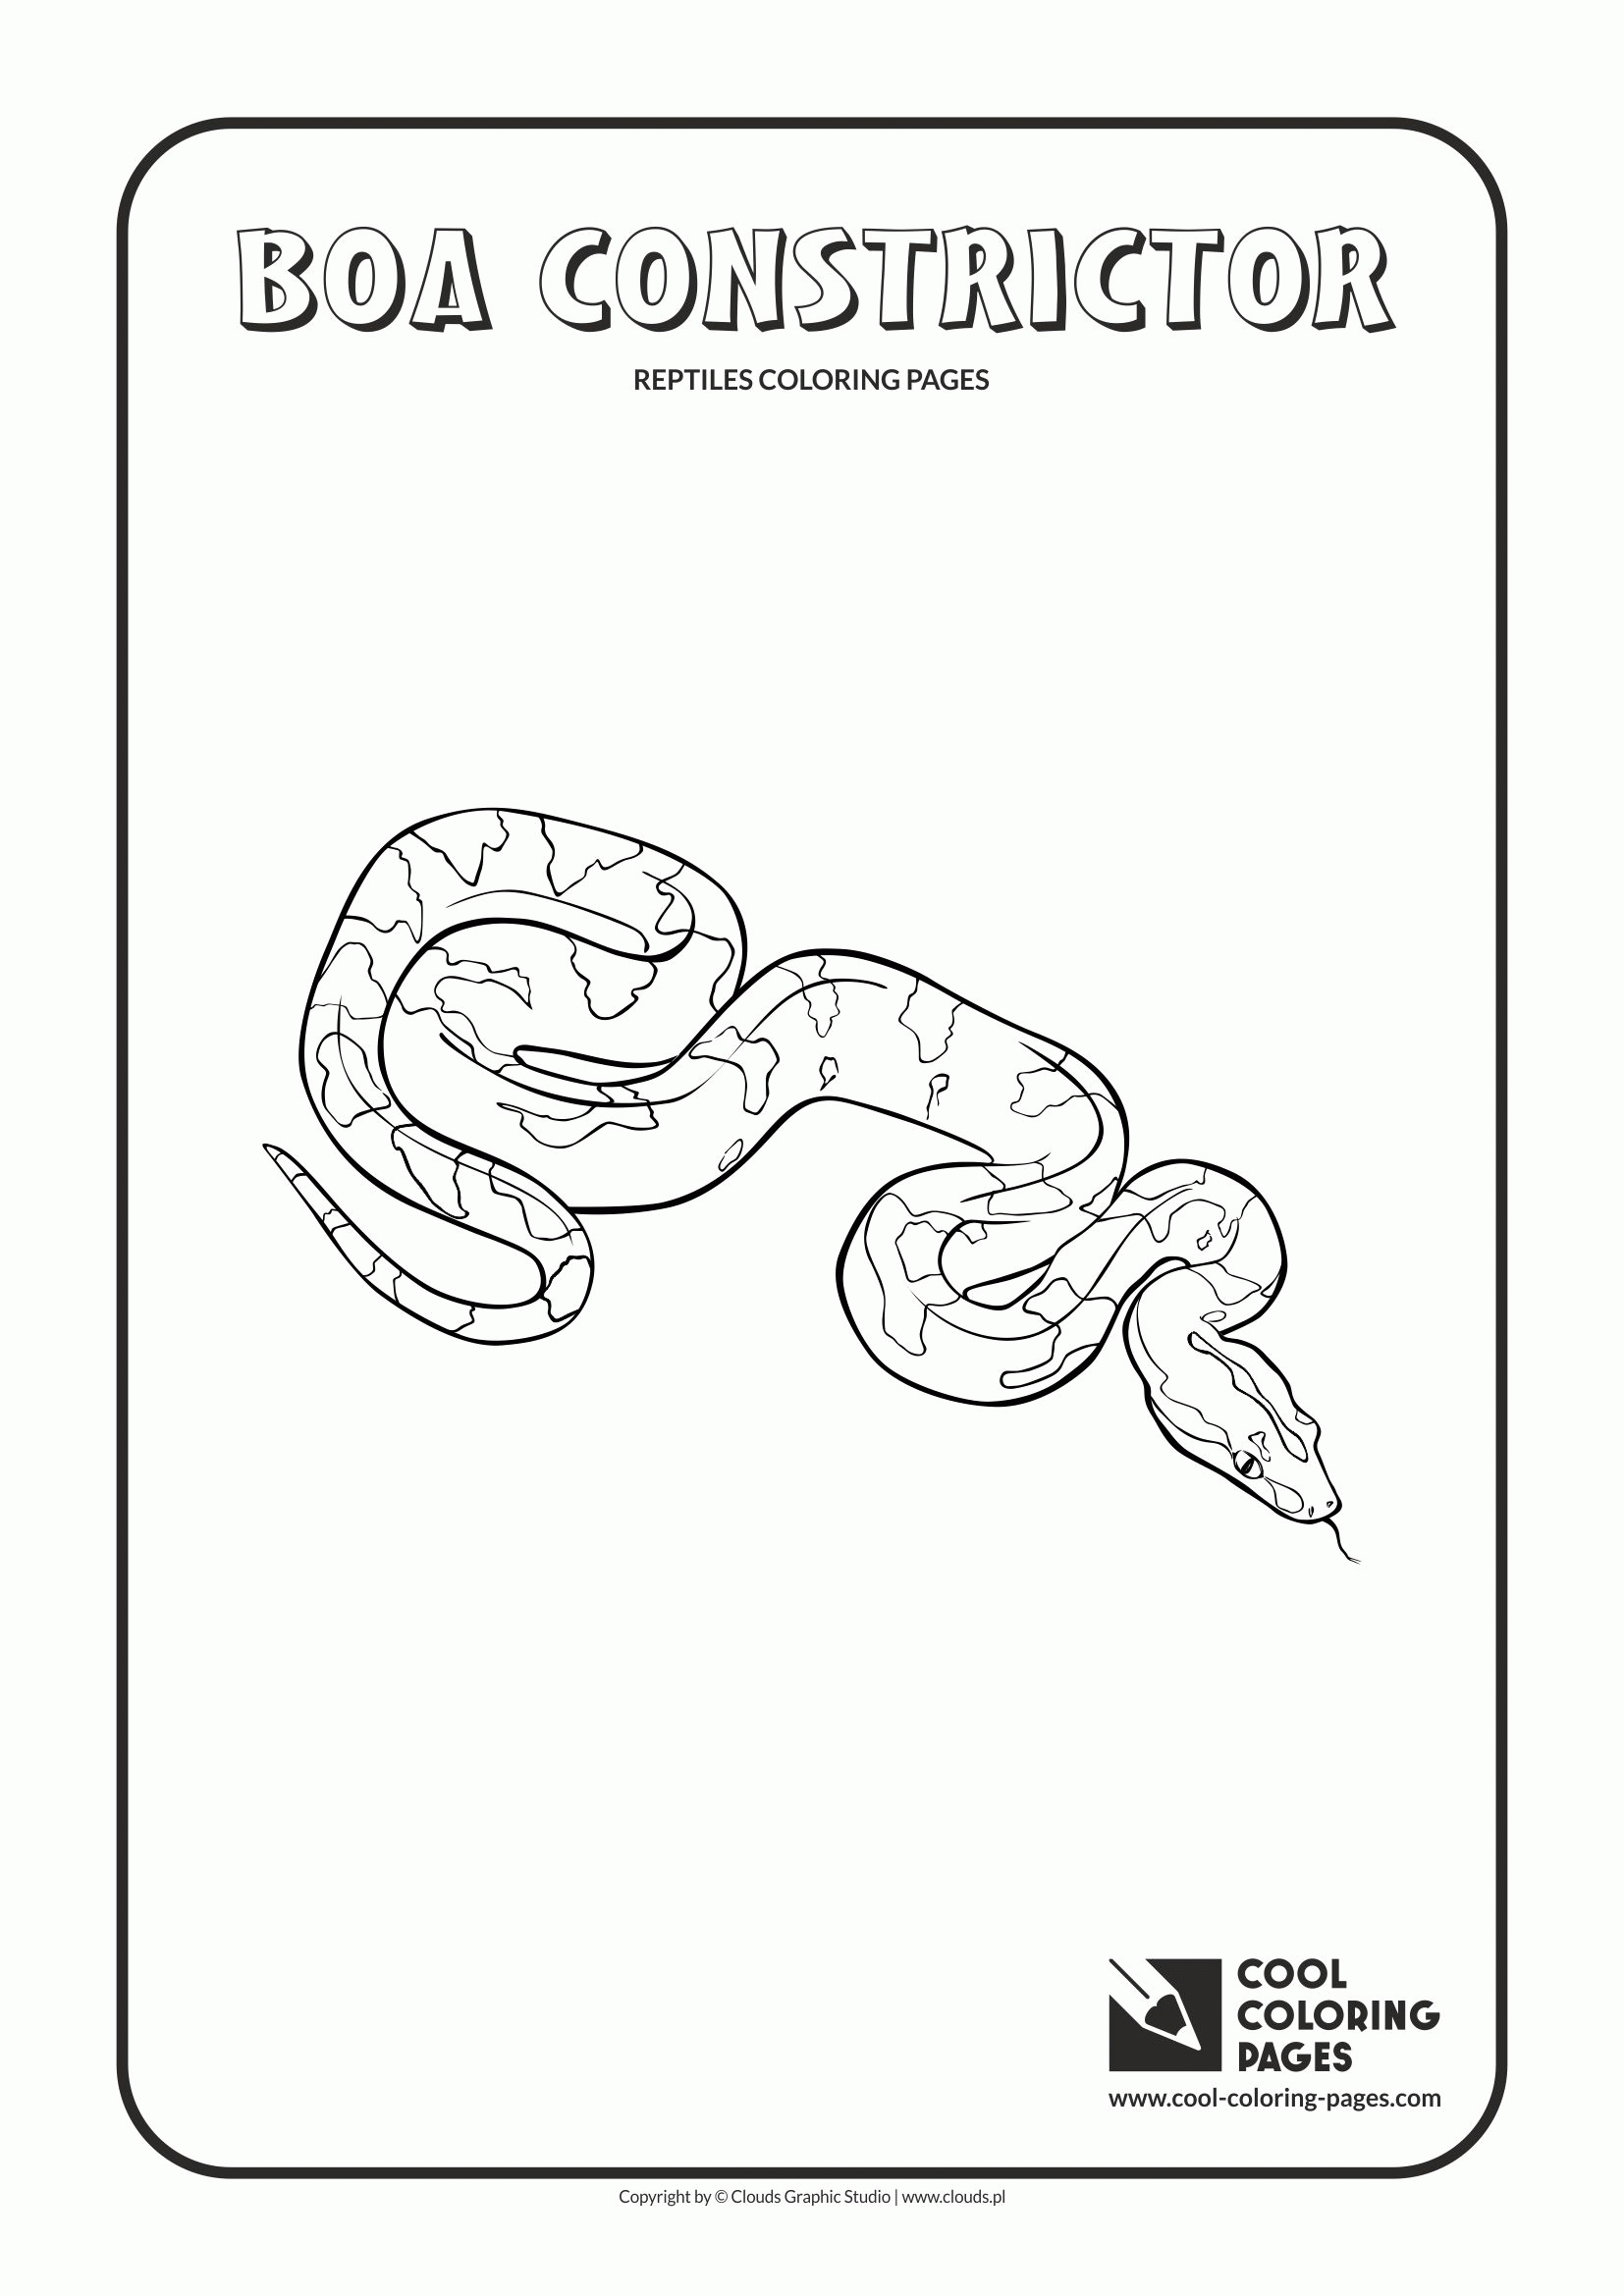 Boa constrictor coloring page | Cool Coloring Pages